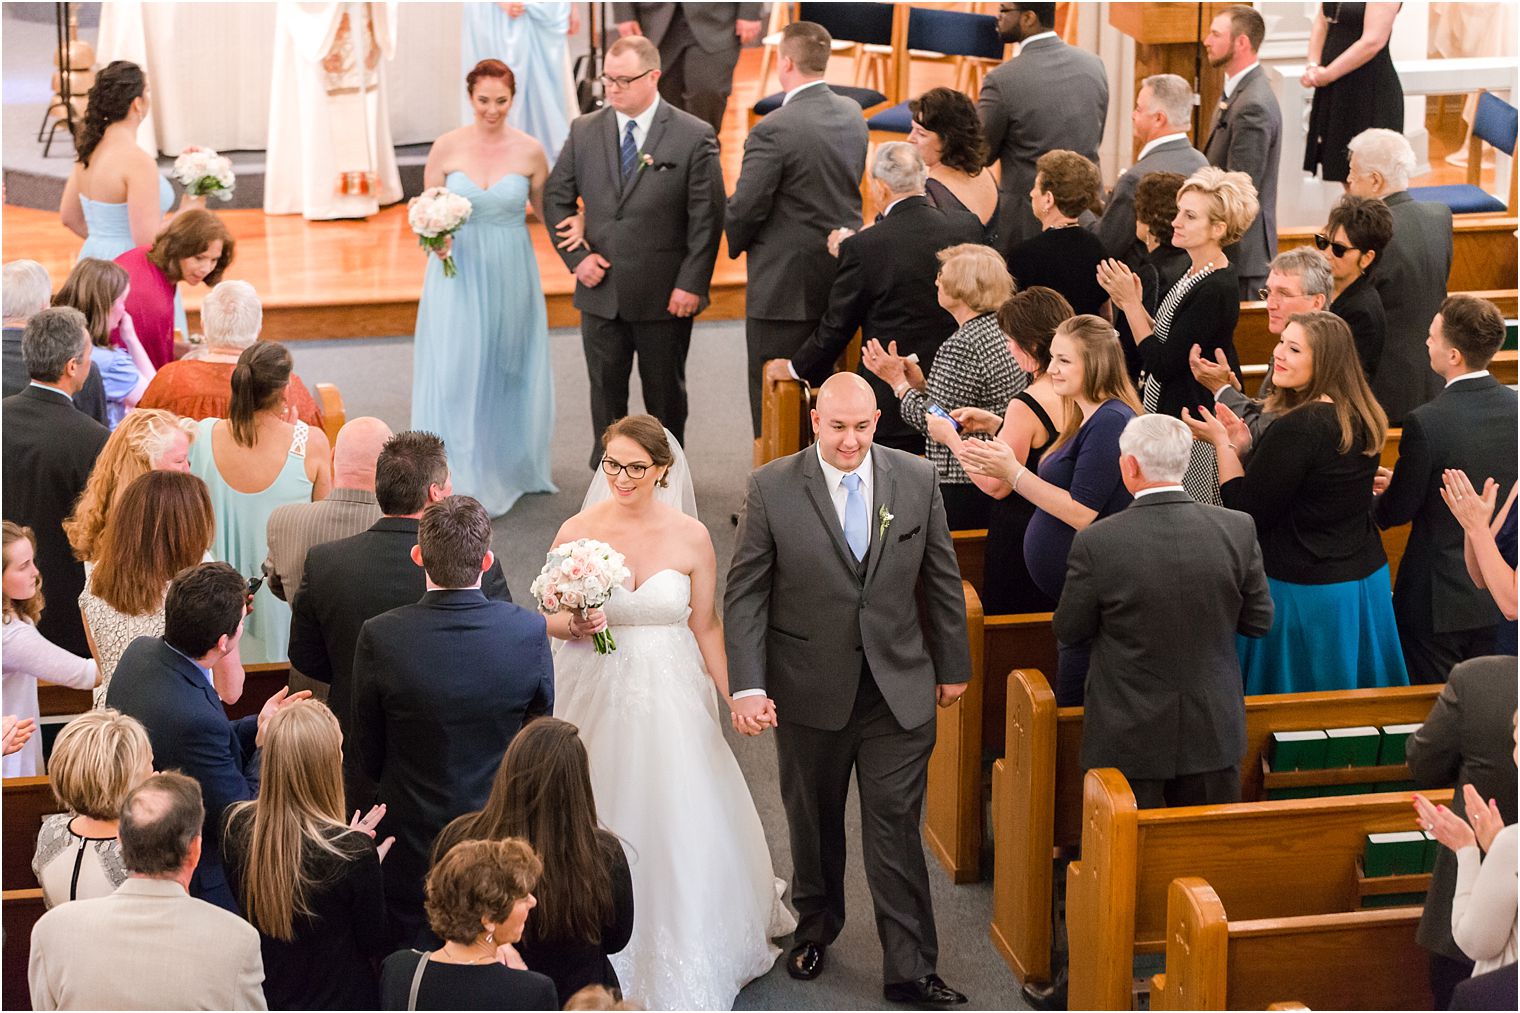 Recessional of bride and groom